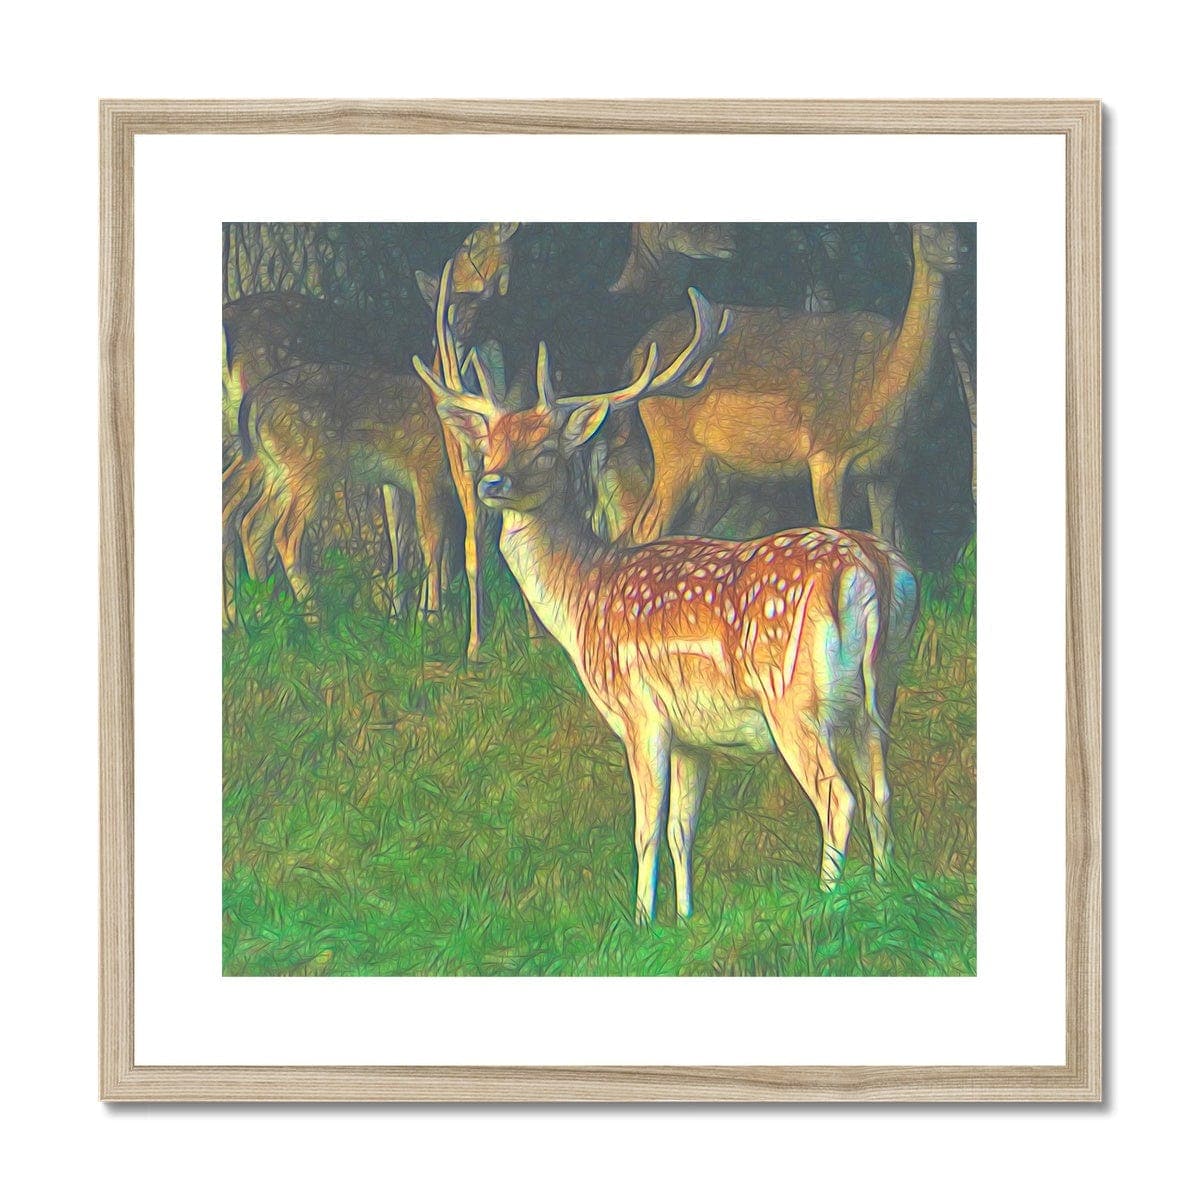 Male deer, Framed & Mounted Print,by Mother Nature Art